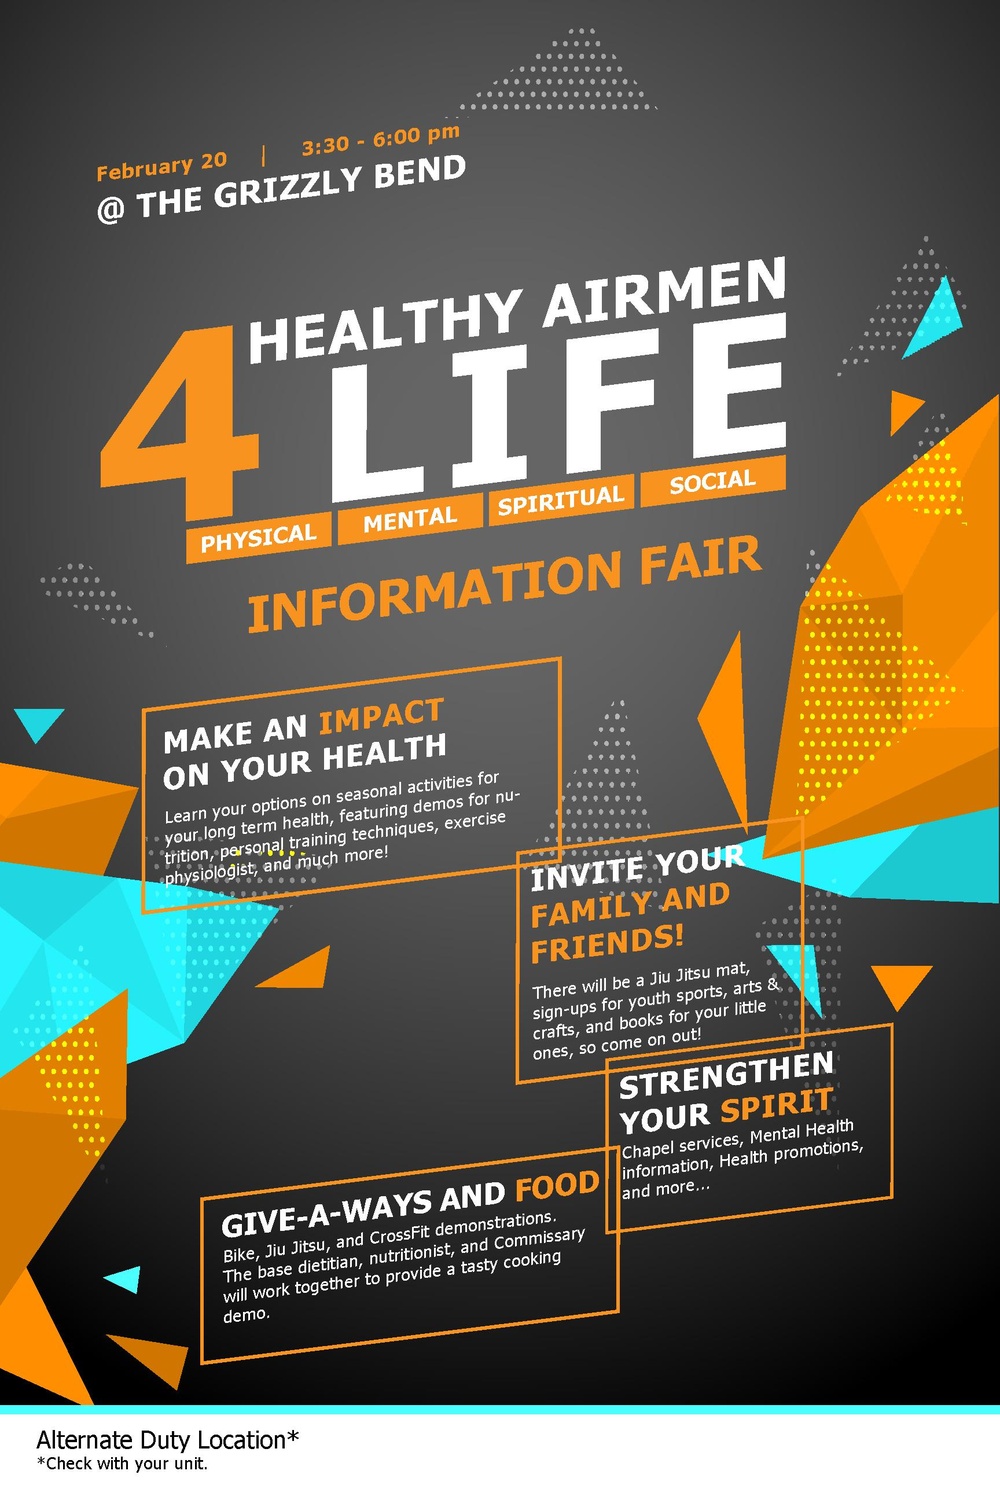 Healthy Airmen 4 Life Event Poster 2020